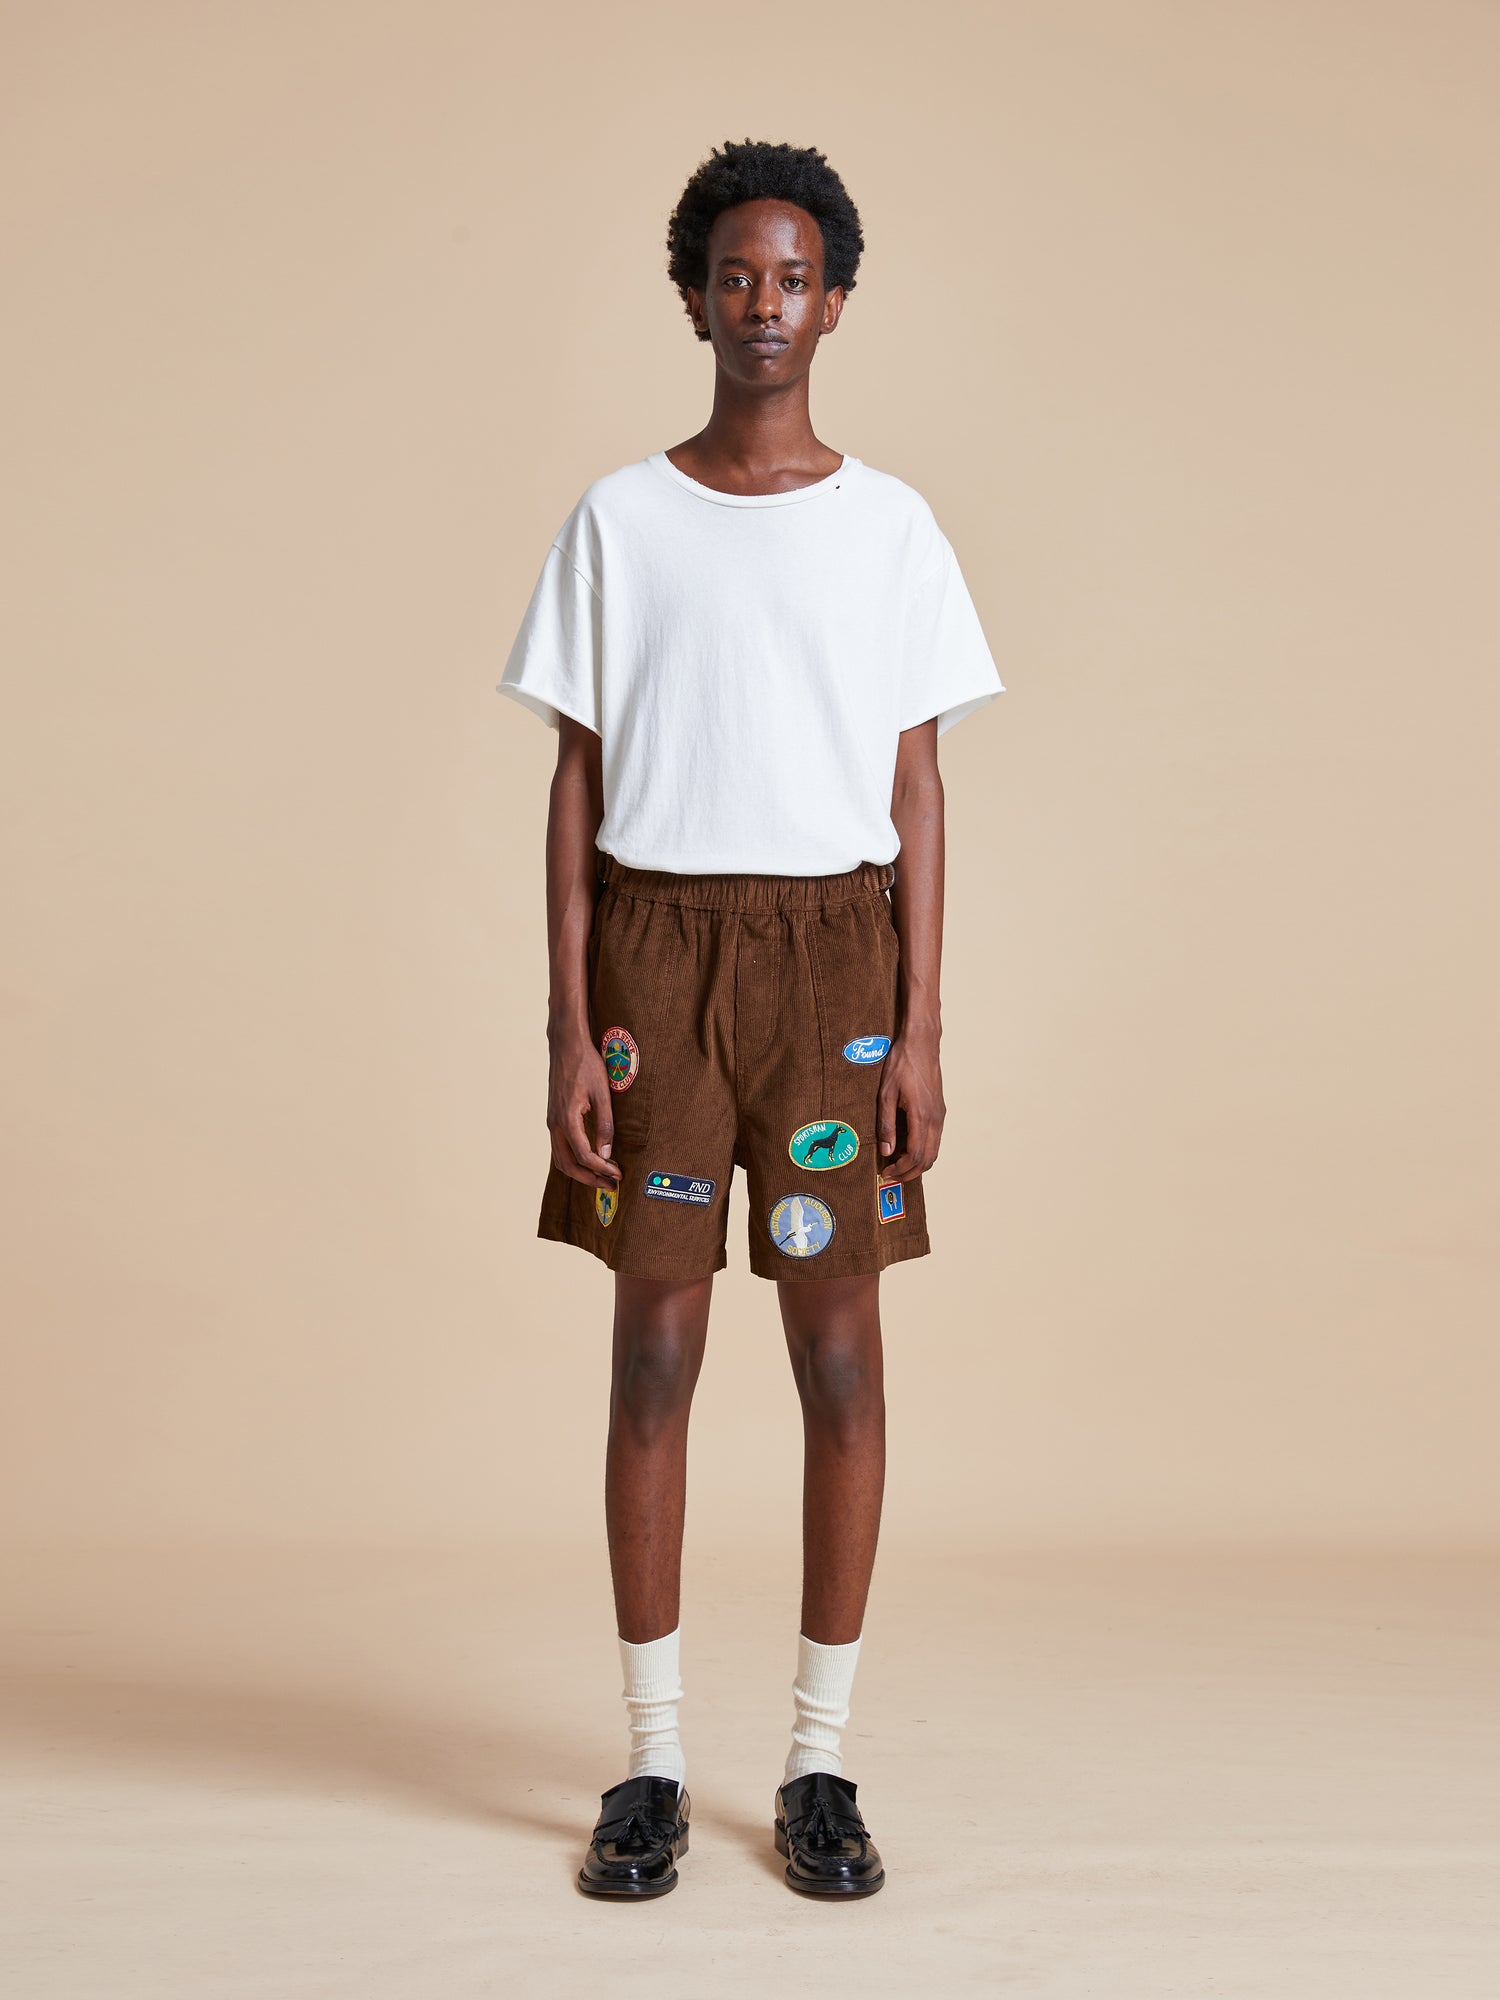 The model is wearing a white t-shirt and Found Canoe Multi Patch Corduroy Shorts.